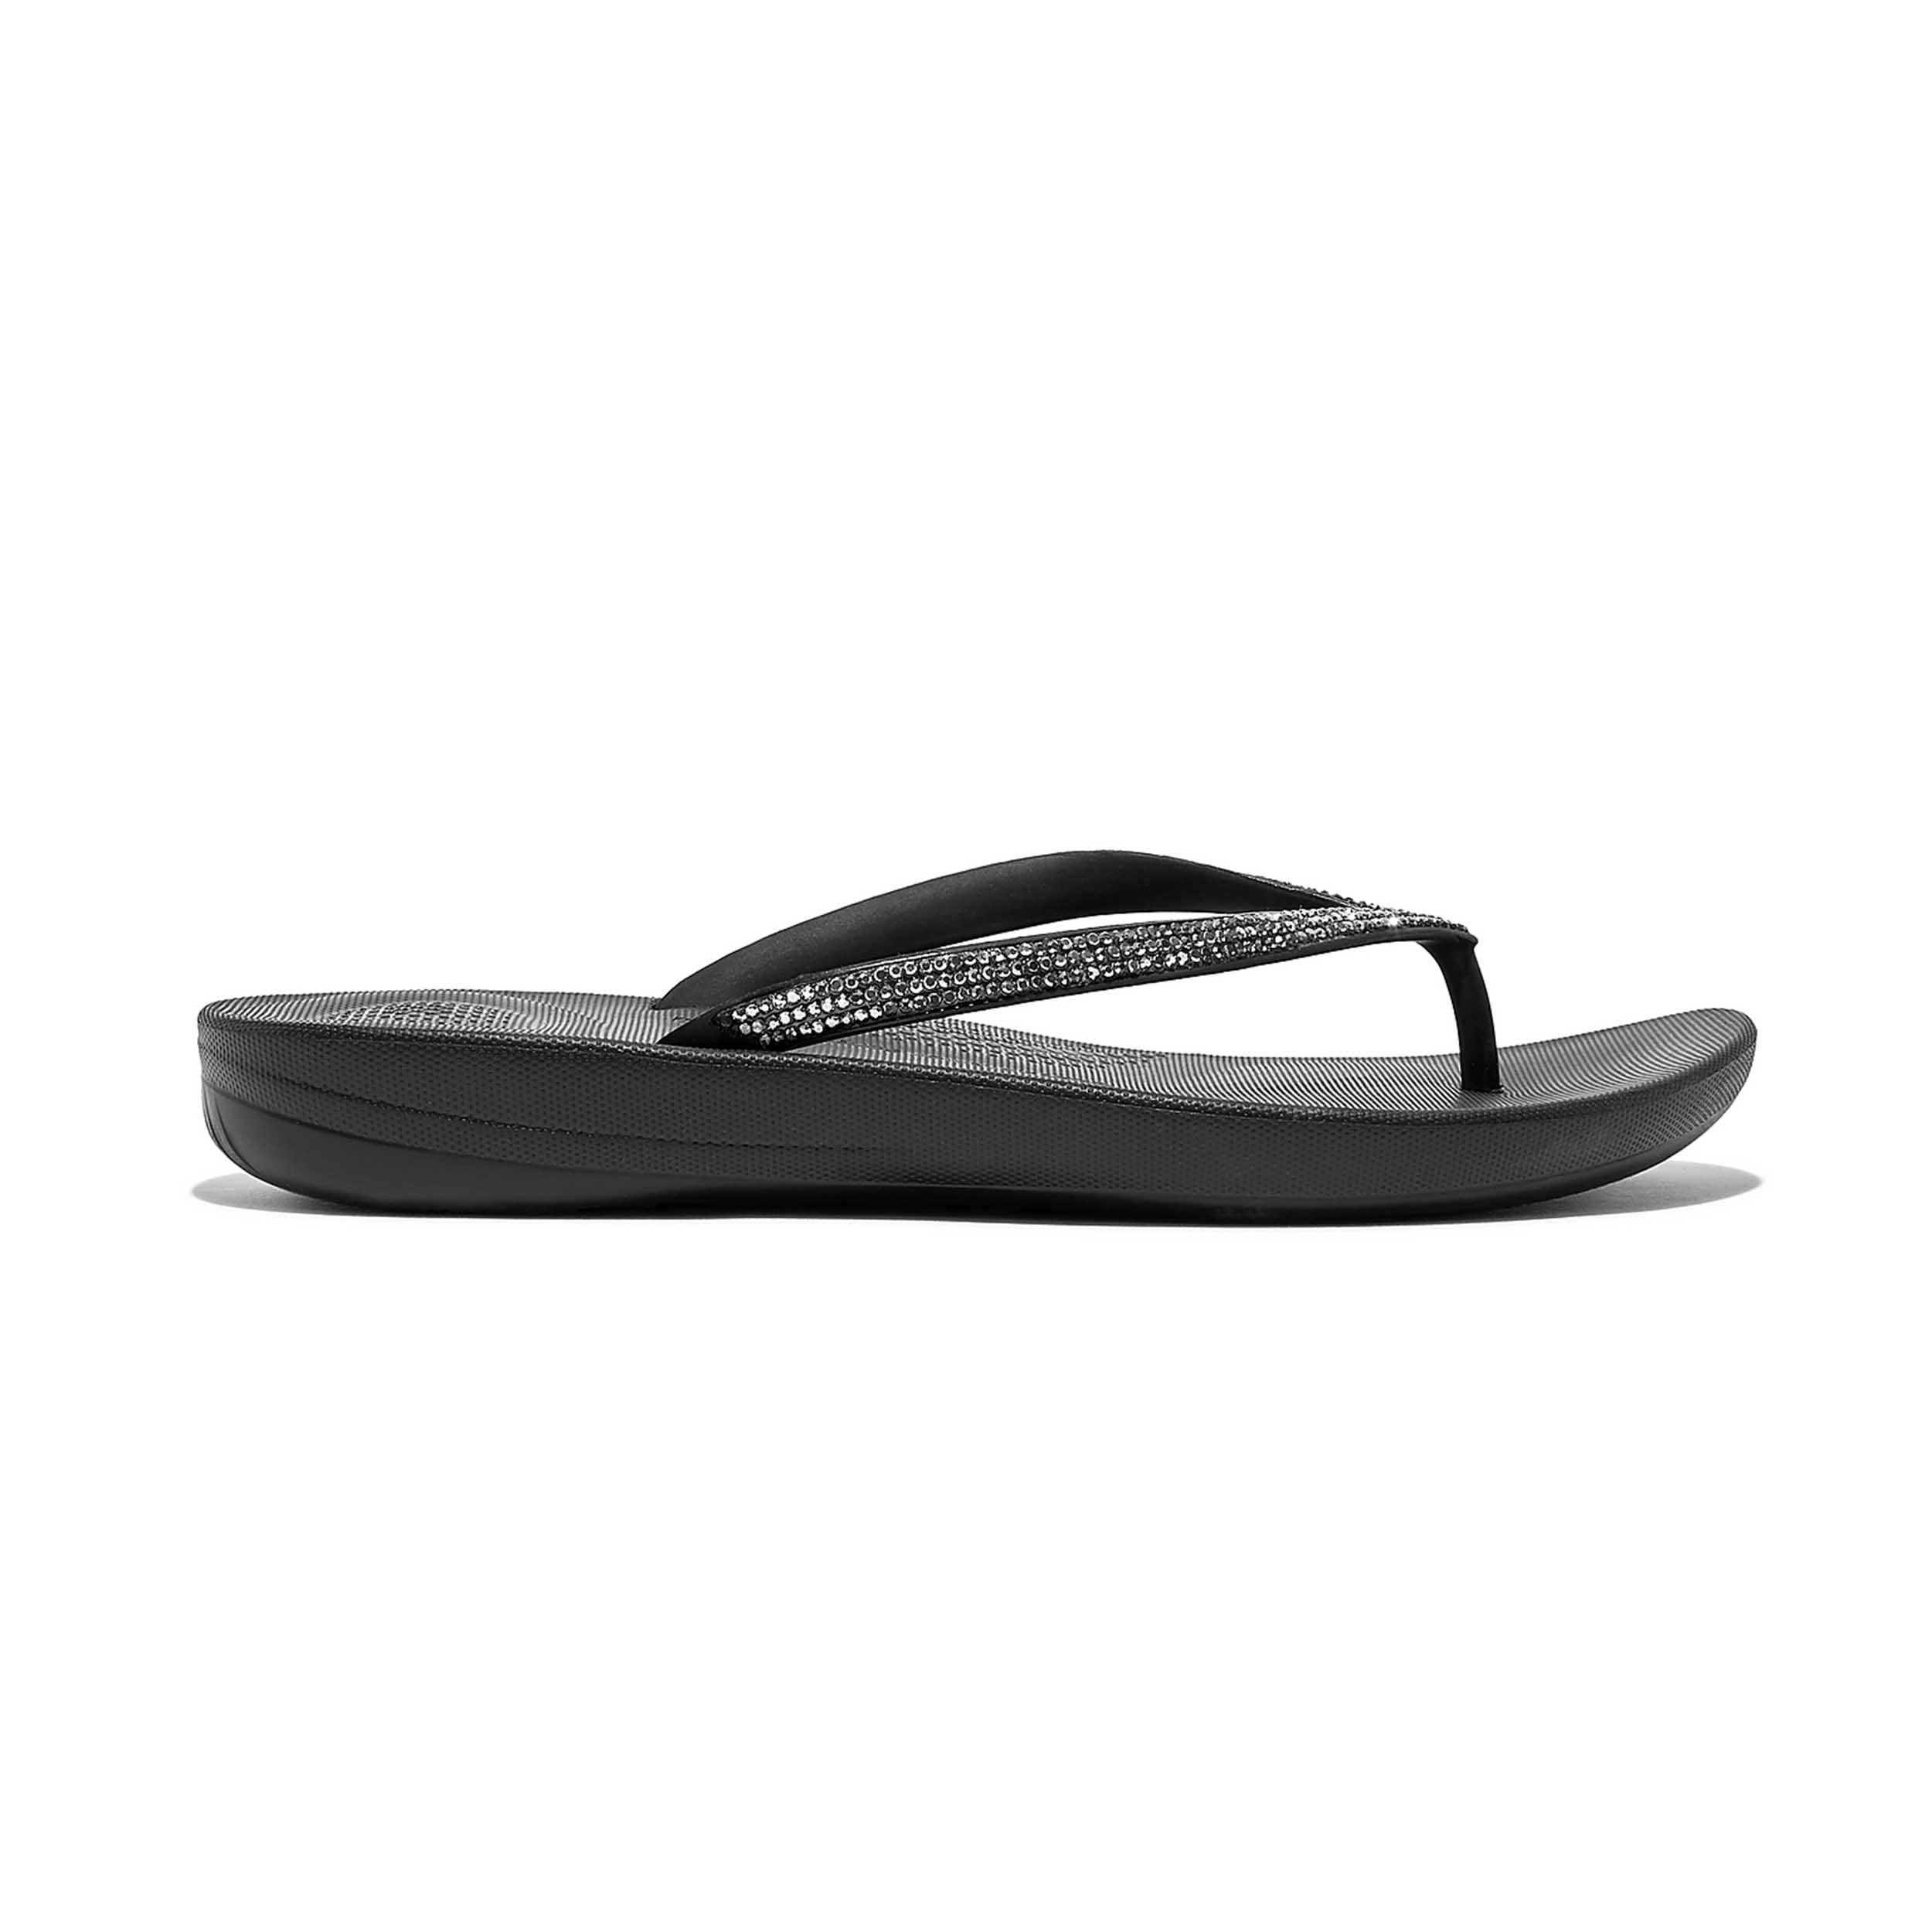 FitFlop R08 Slipper iQushion Sparkle Black